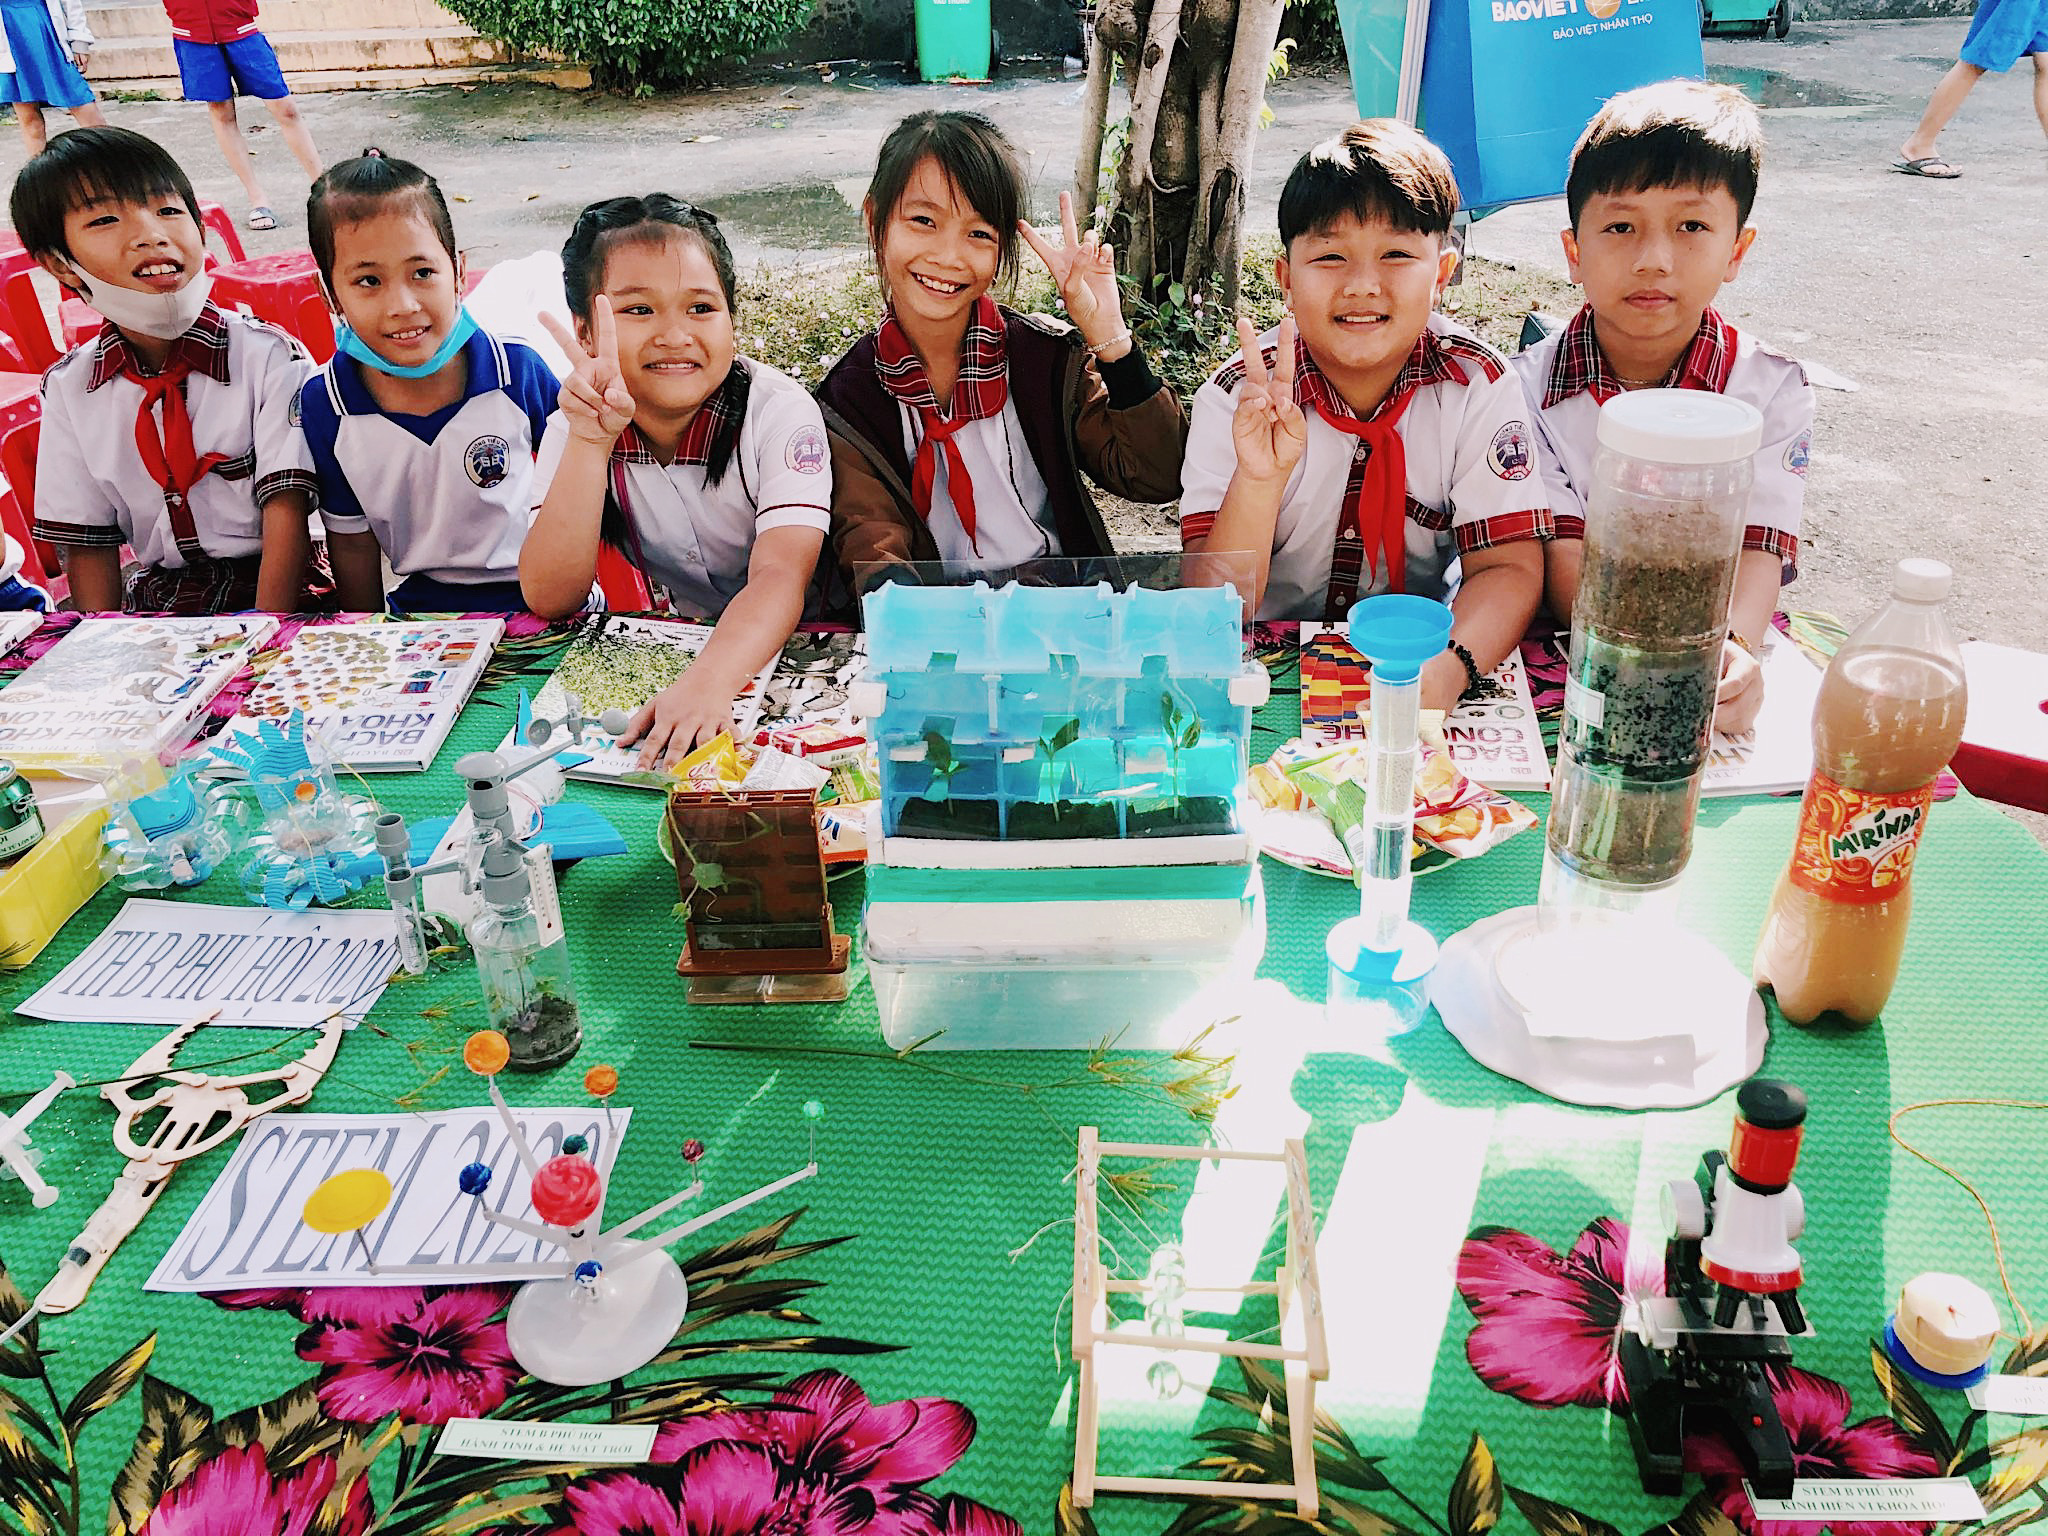 A youth-led science community to enable Ho Chi Minh City to move forward on a global scale